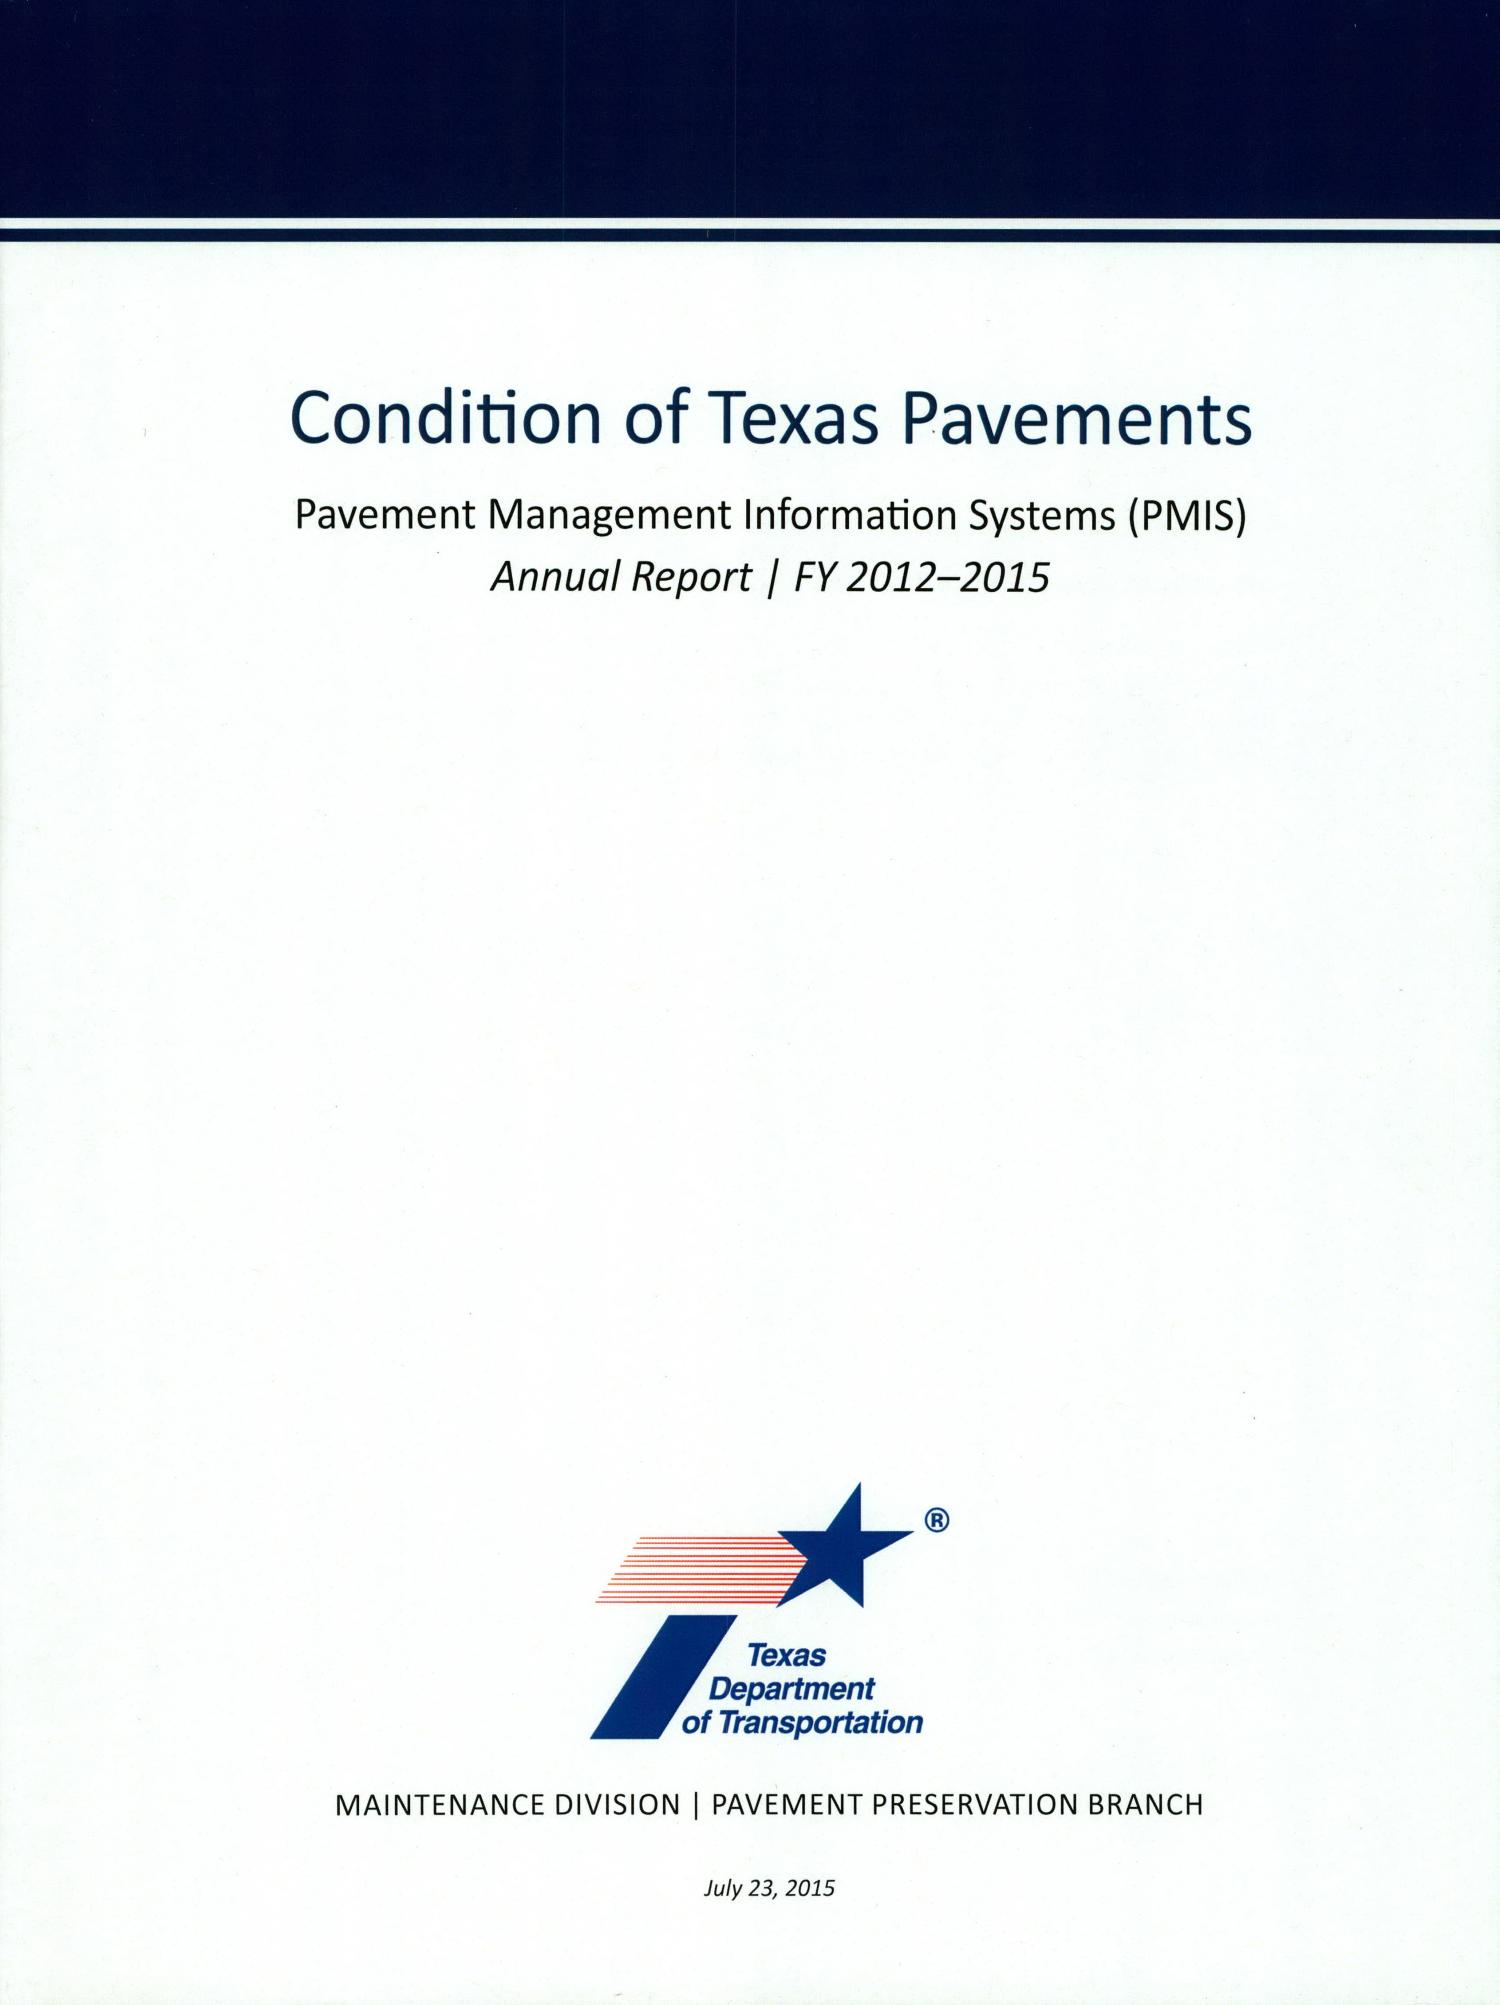 Condition of Texas Pavements: Pavement Management Information Systems Annual Report, 2012-2015
                                                
                                                    Condition Of Texas Pavements
                                                